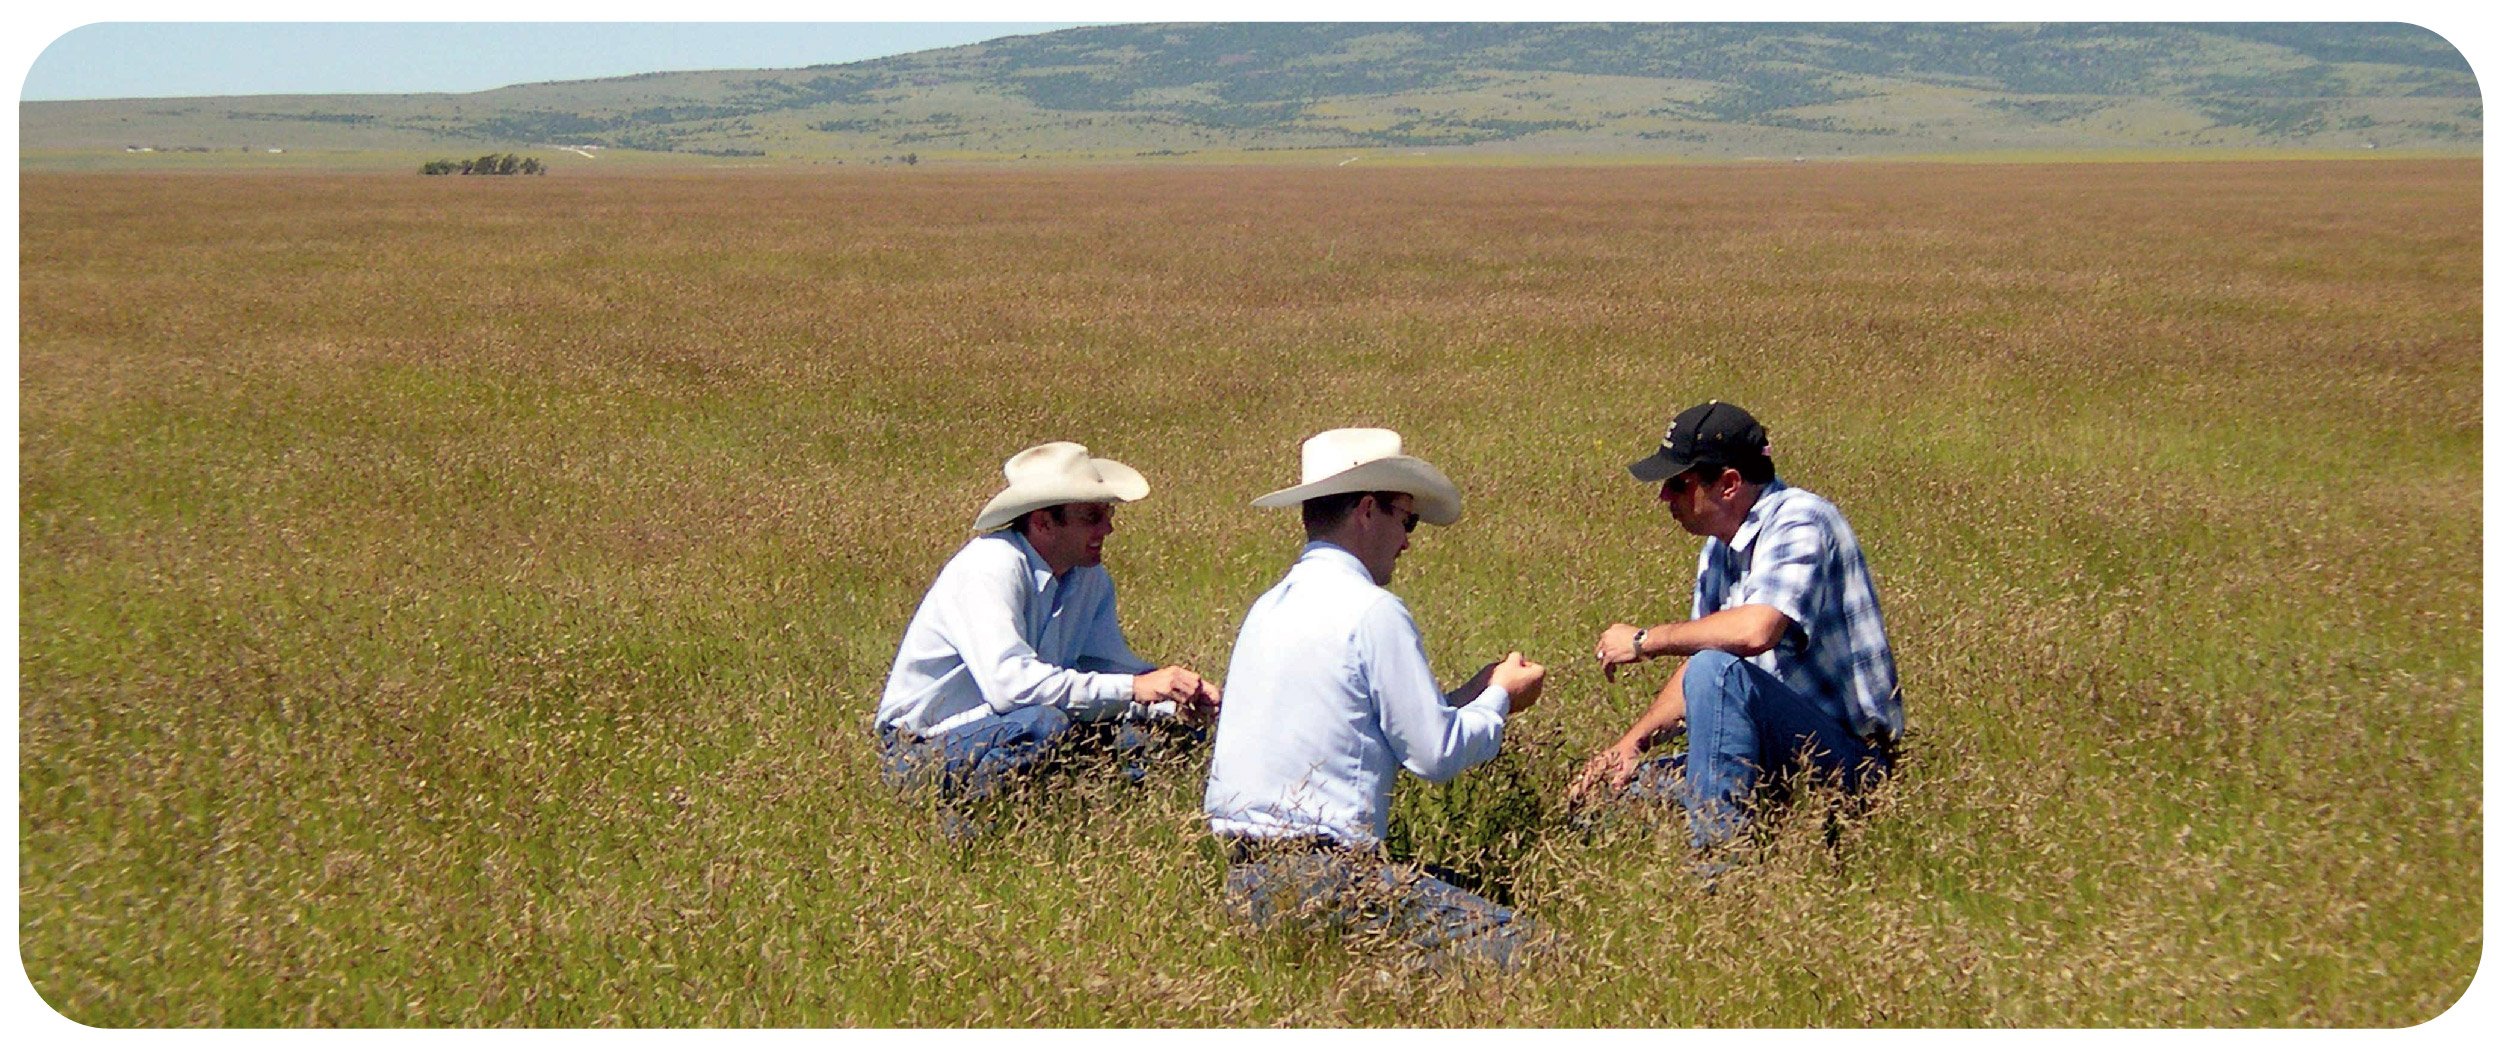 curtis and curtis team analyzing seeds in the field